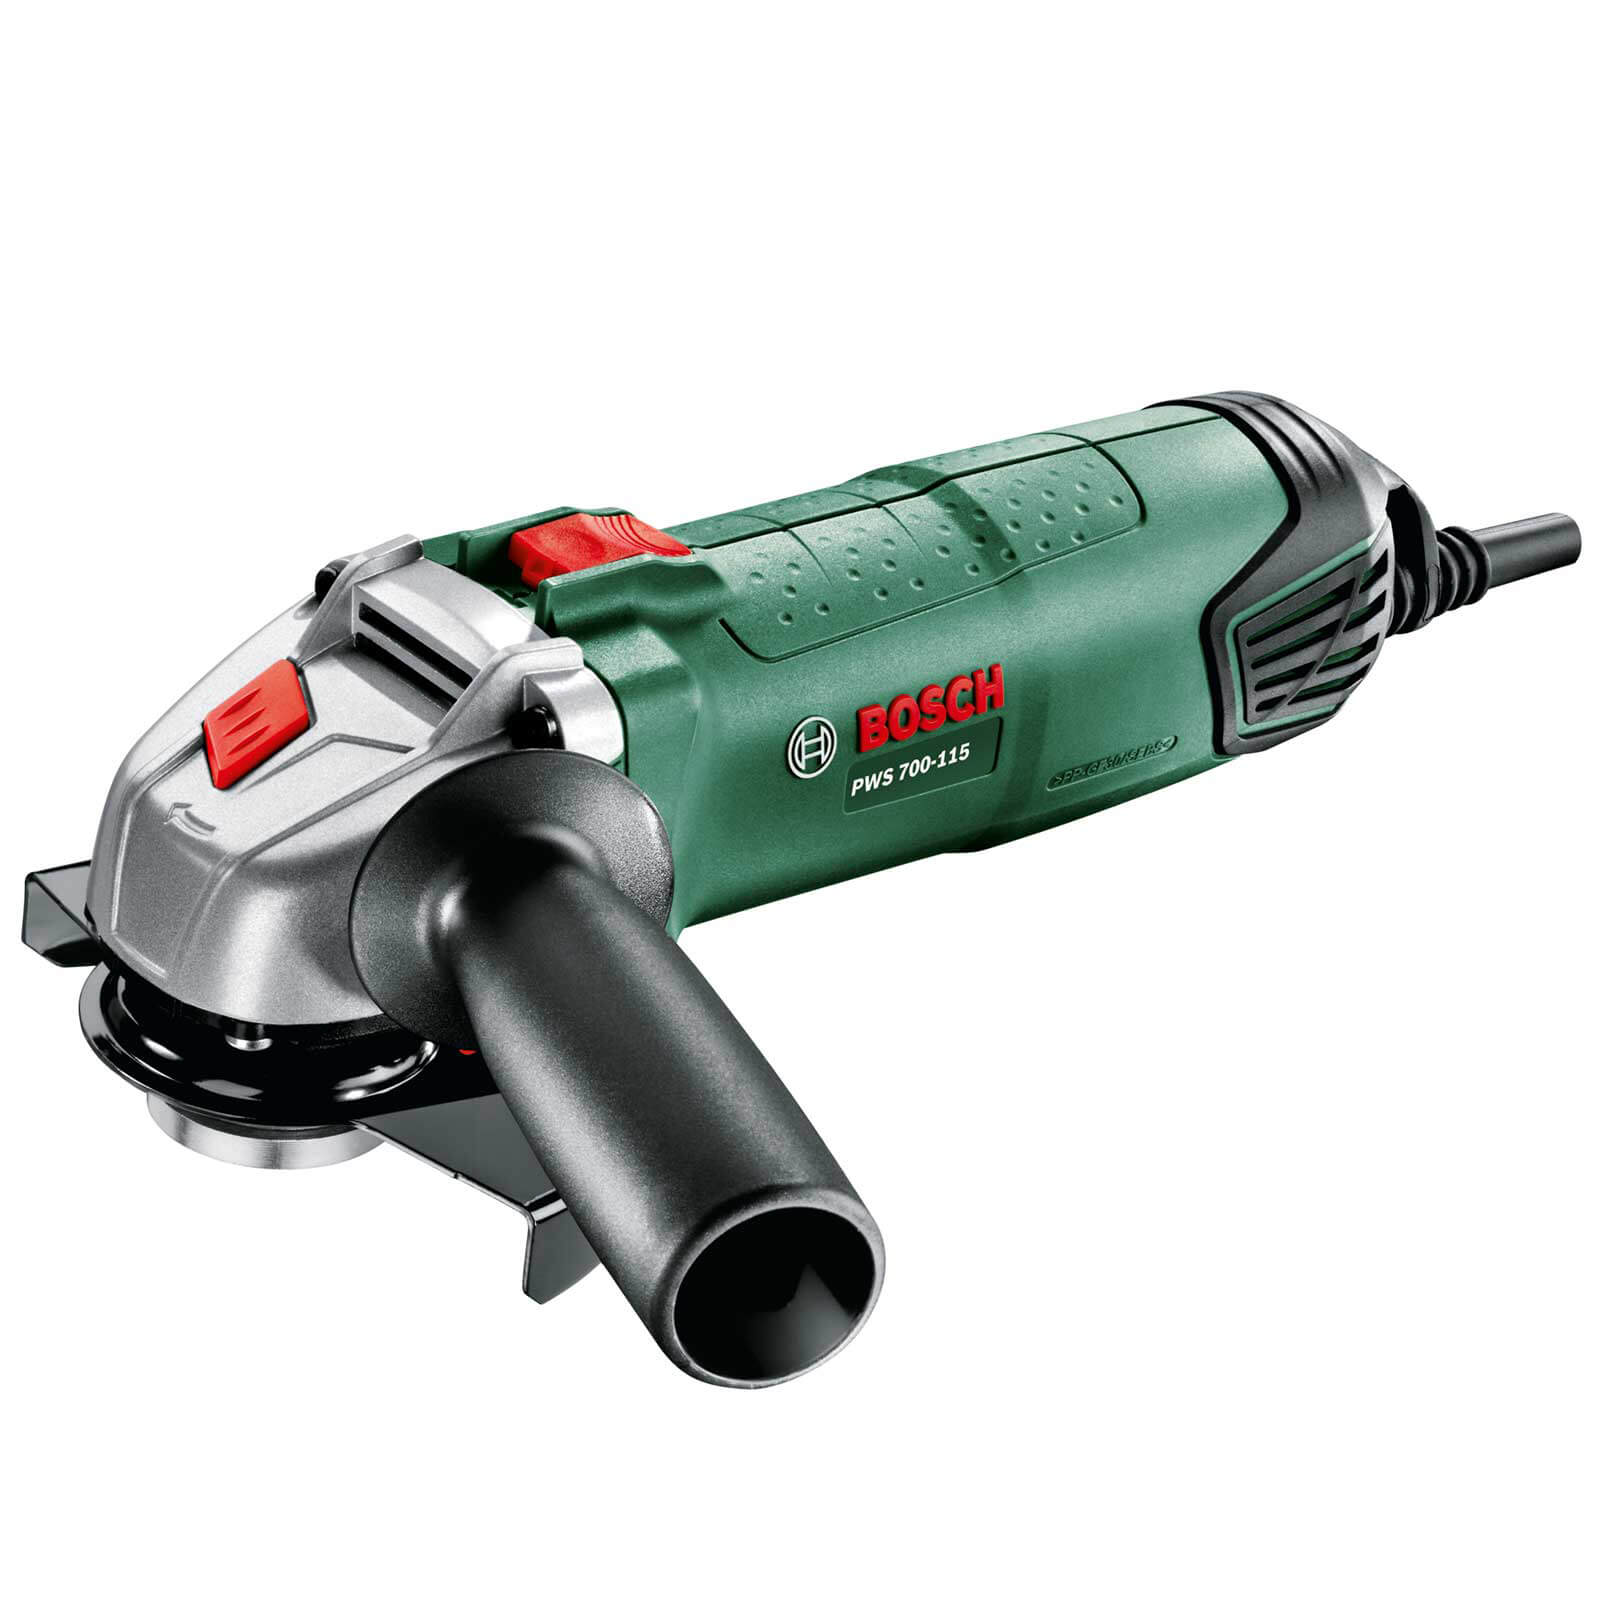 Image of Bosch PWS 700-115 Angle Grinder 115mm